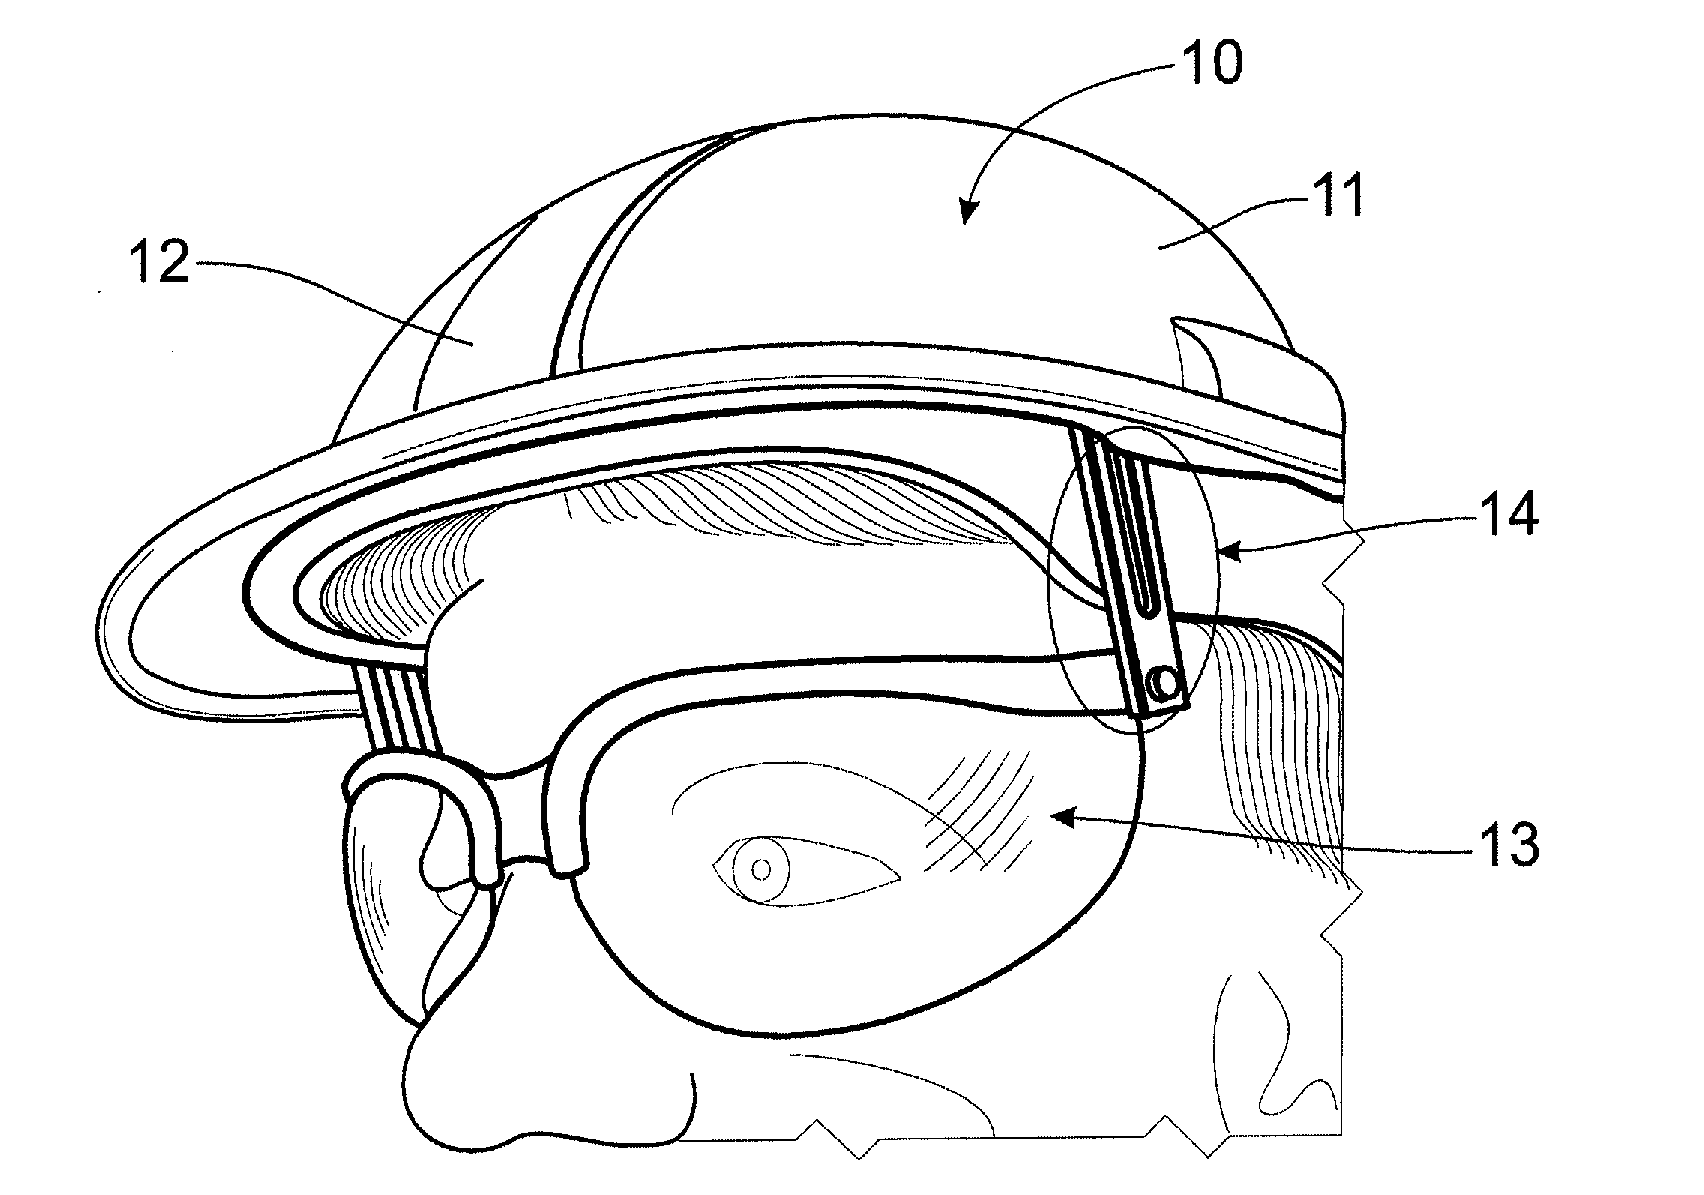 Hard hat with attached safety glasses